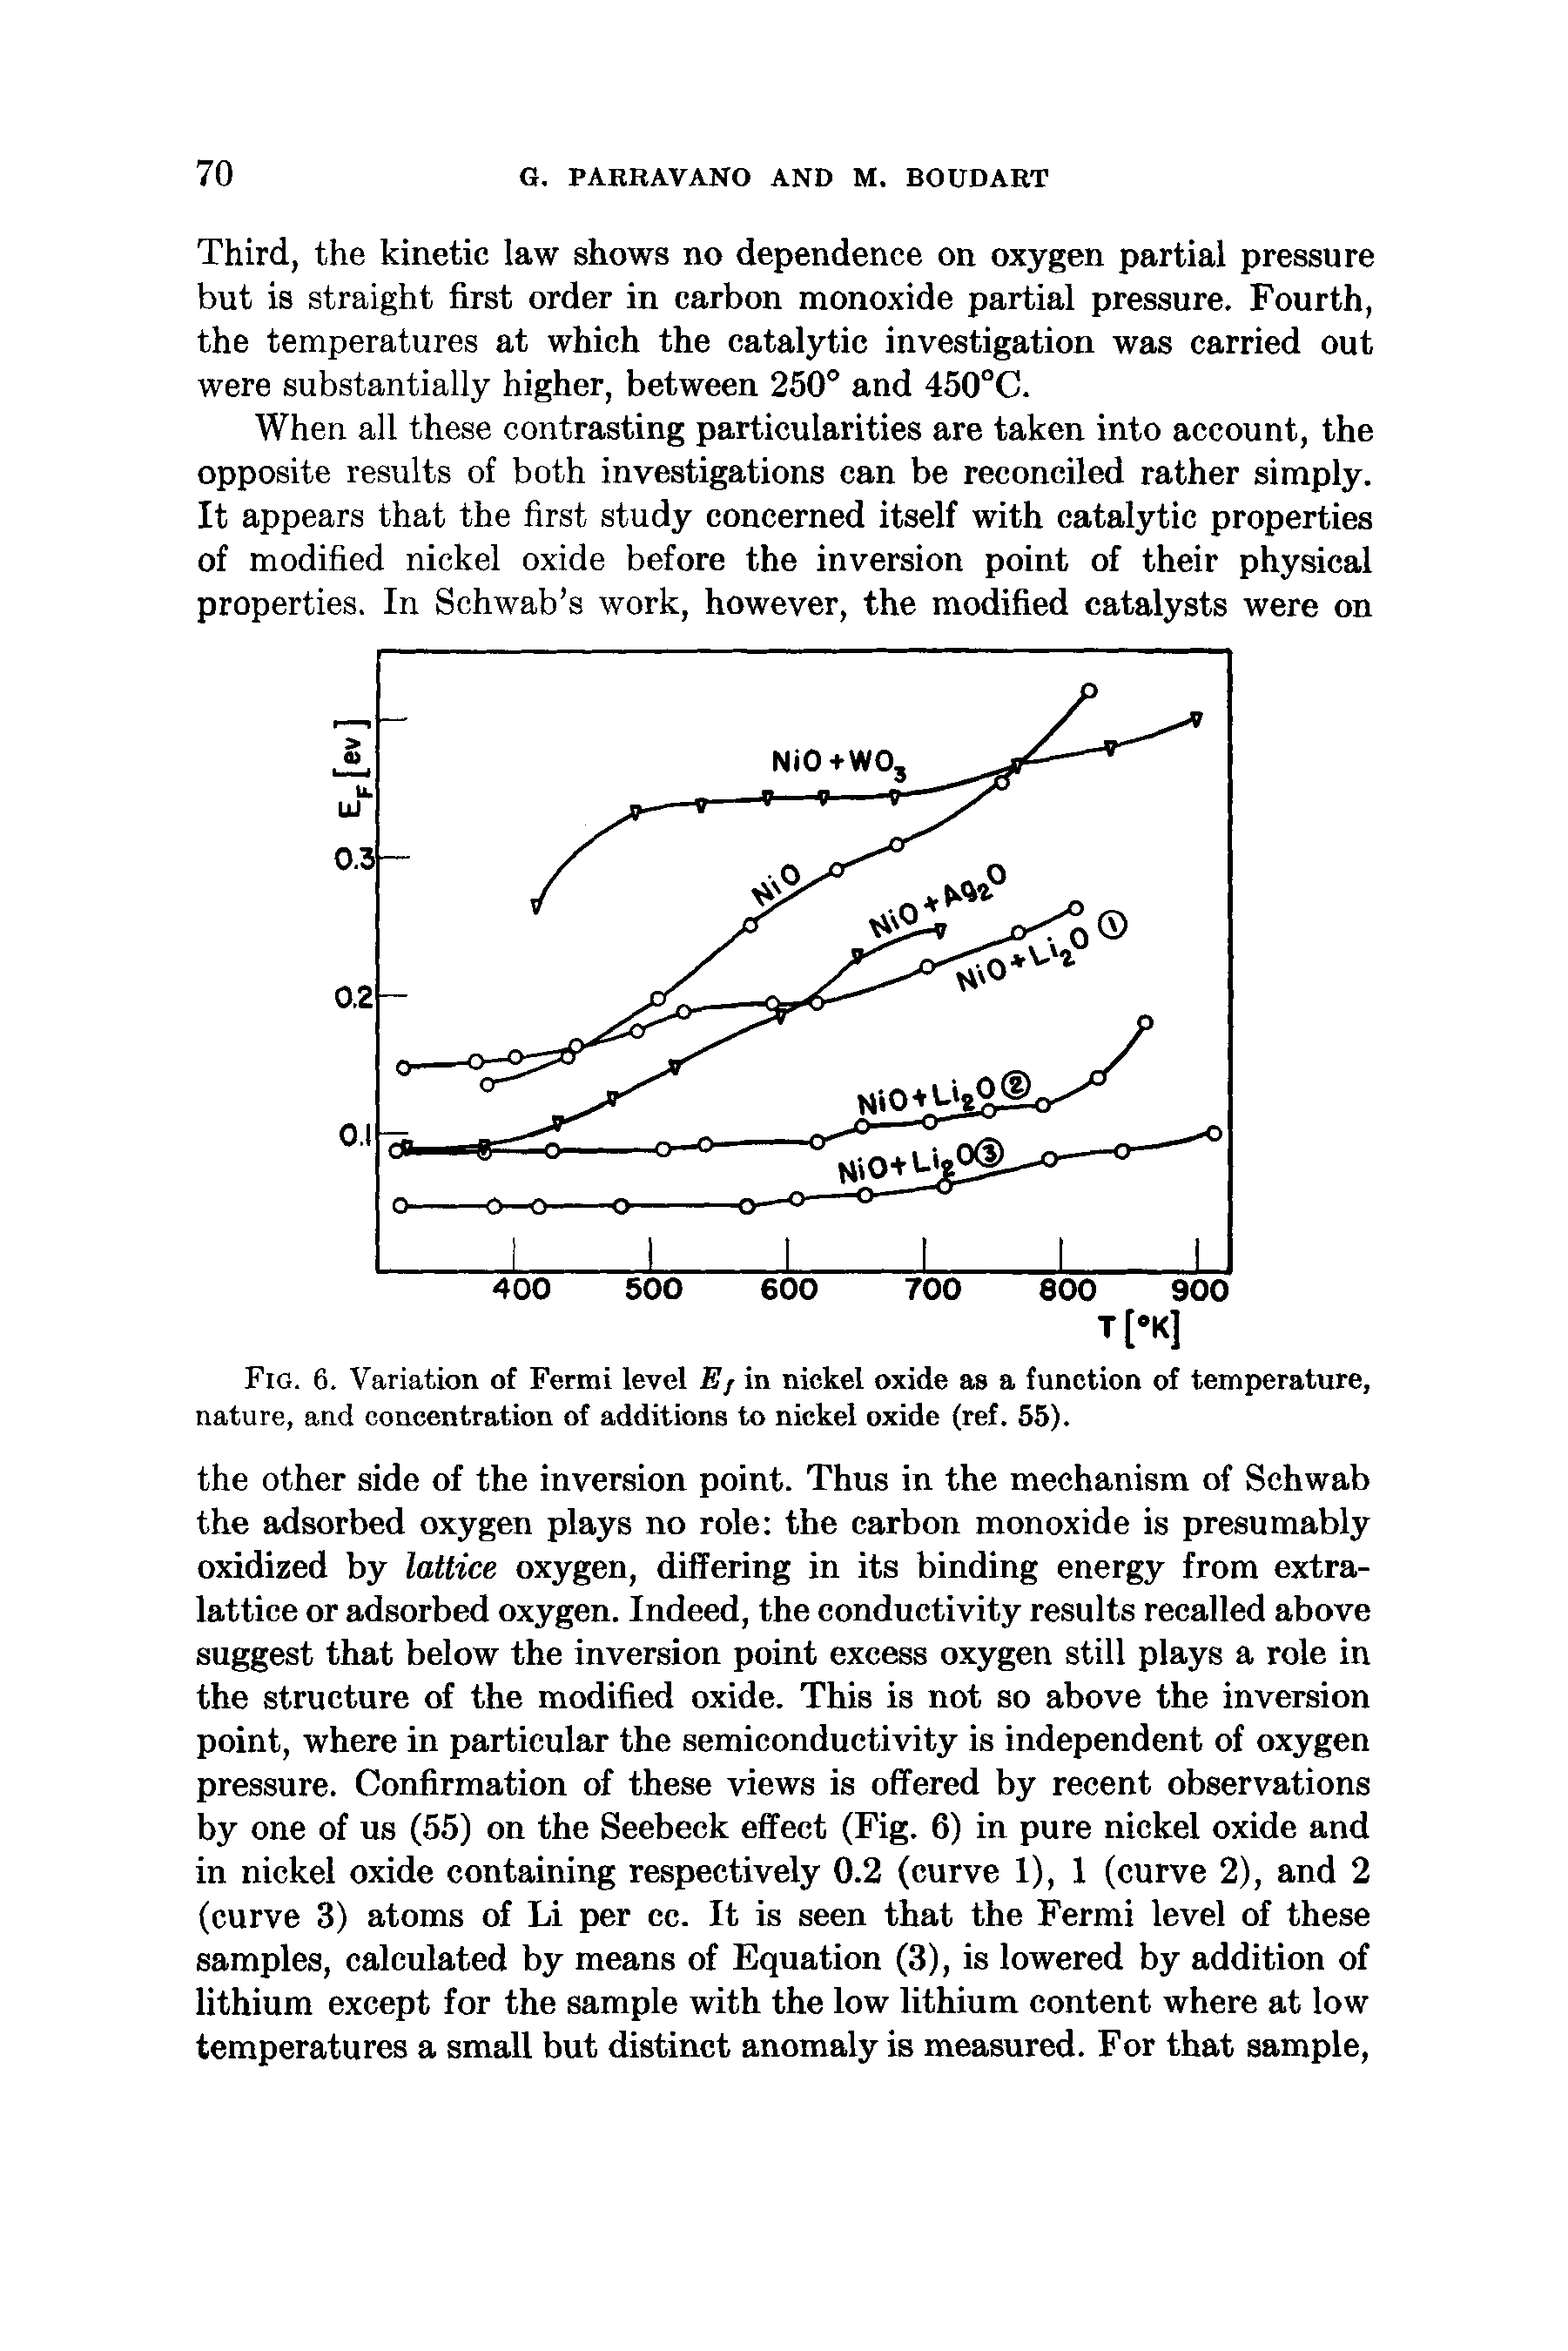 Fig. 6. Variation of Fermi level Ef in nickel oxide as a function of temperature, nature, and concentration of additions to nickel oxide (ref. 55).